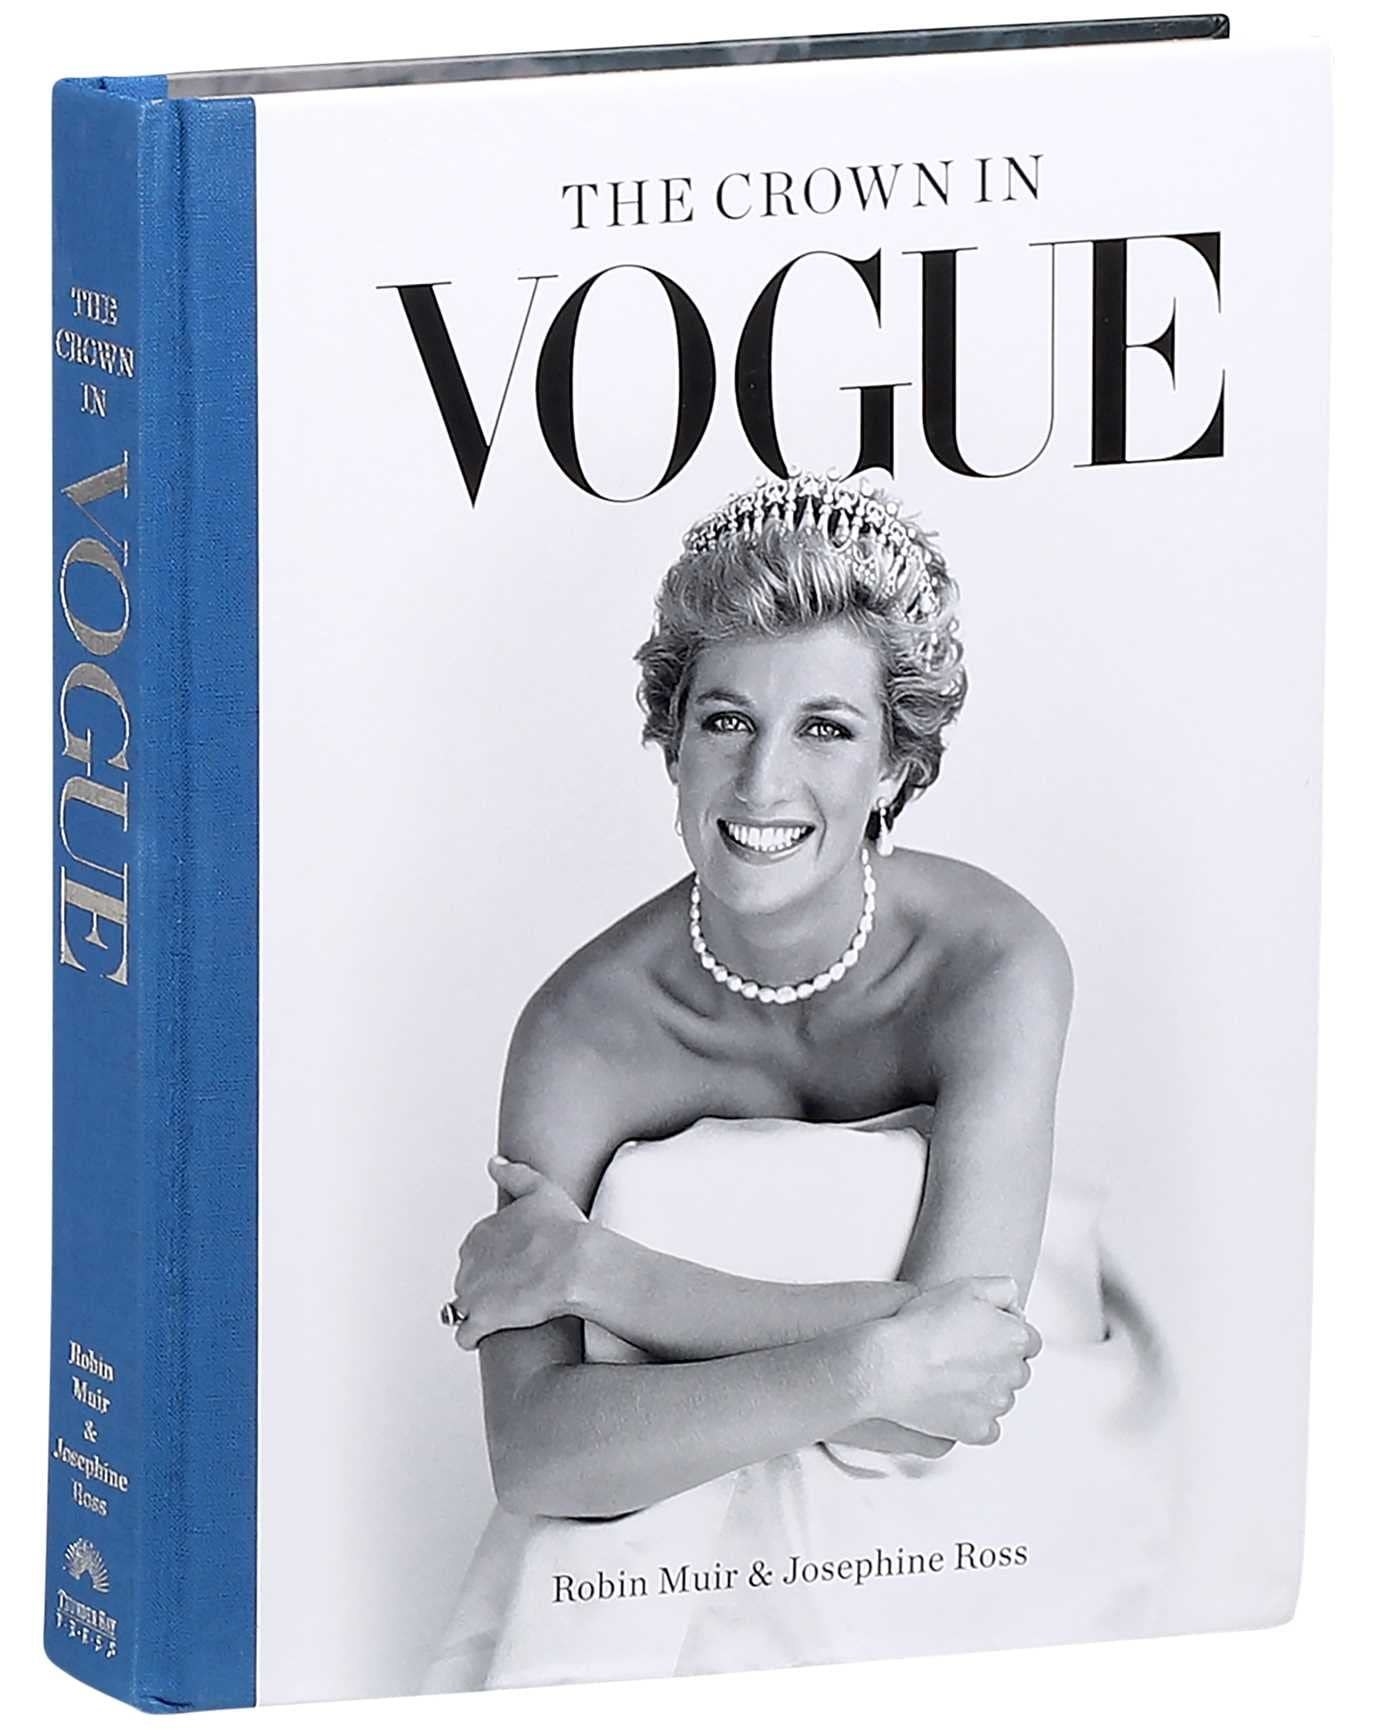 a coffee table book with princess diana on the cover in black and white and a blue spine